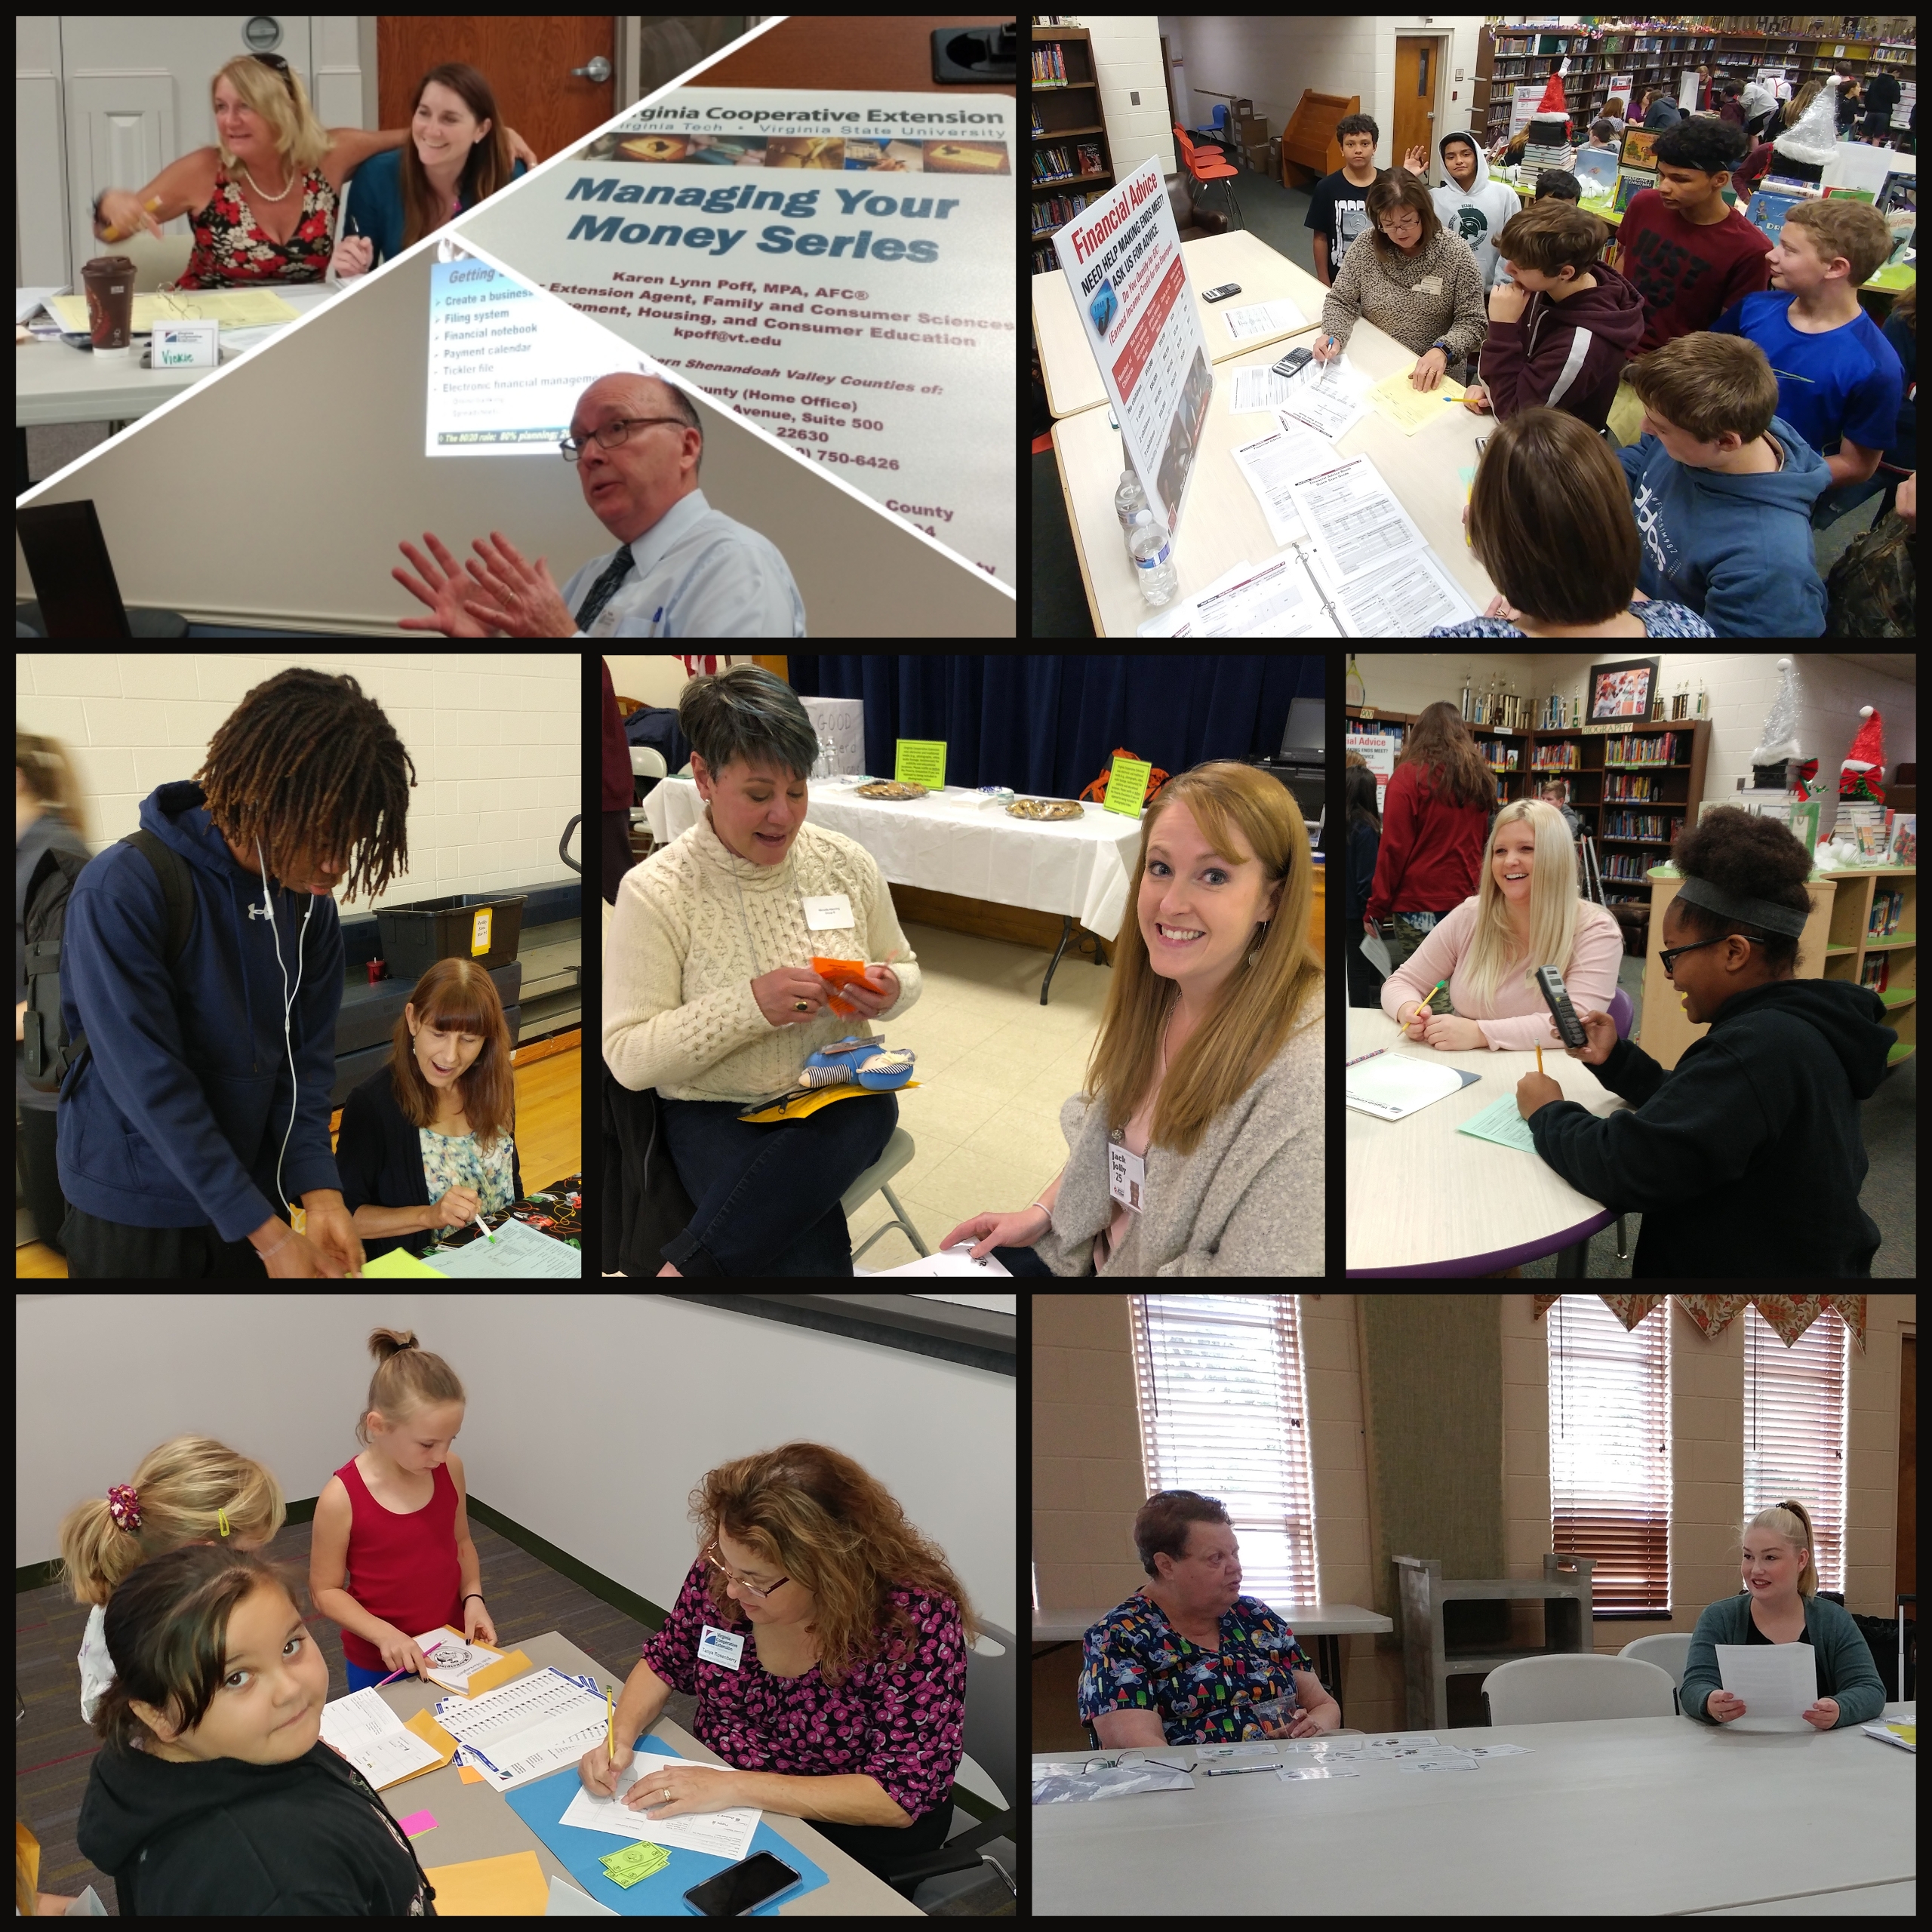 Collage of photos depicting various financial education program activities and events.